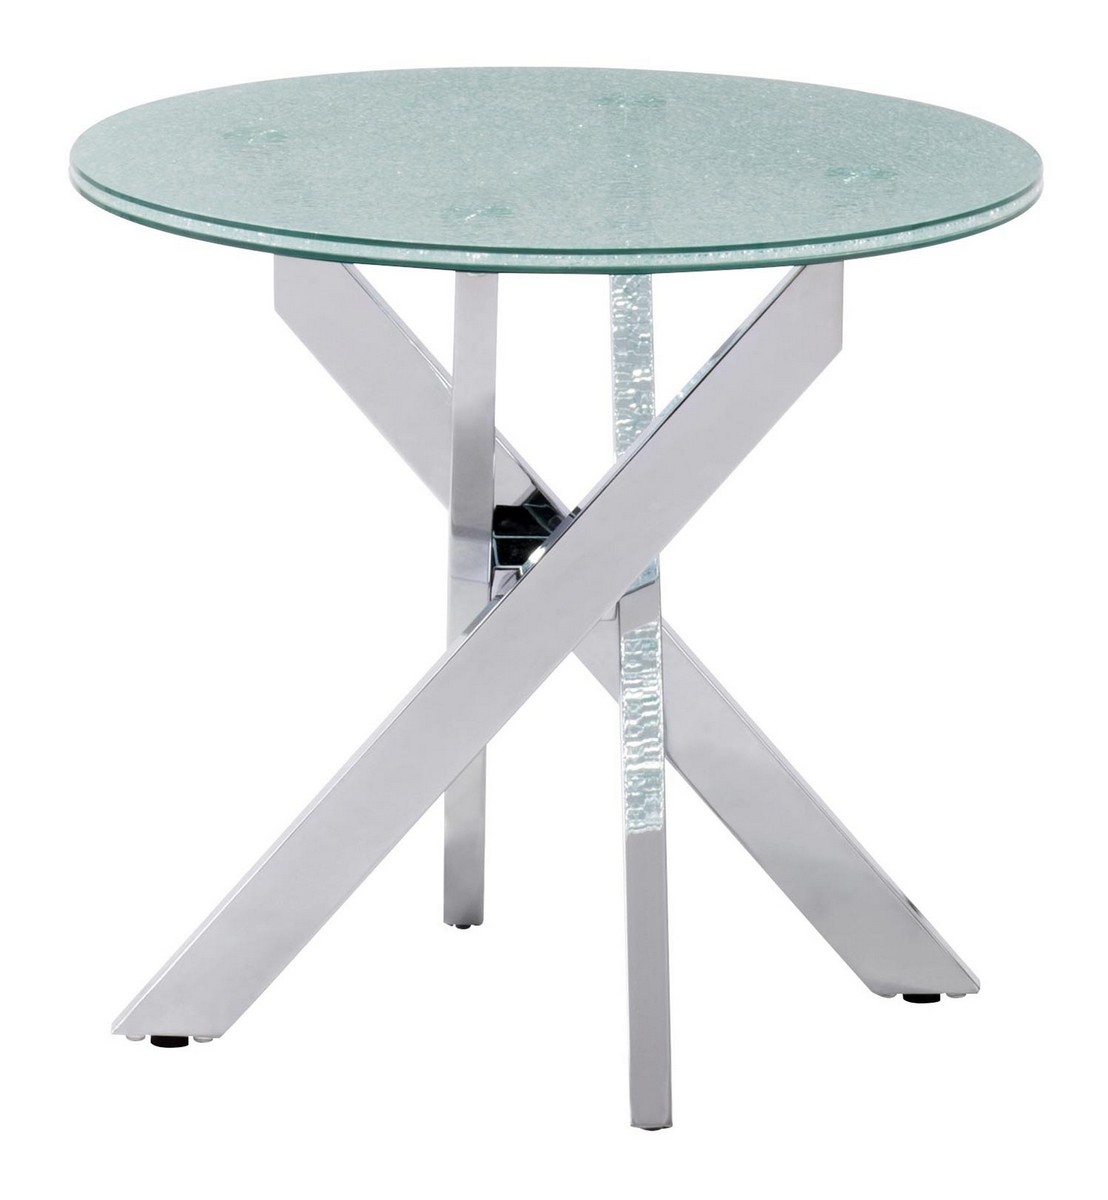 Zuo Modern Stance Side Table - Crackled